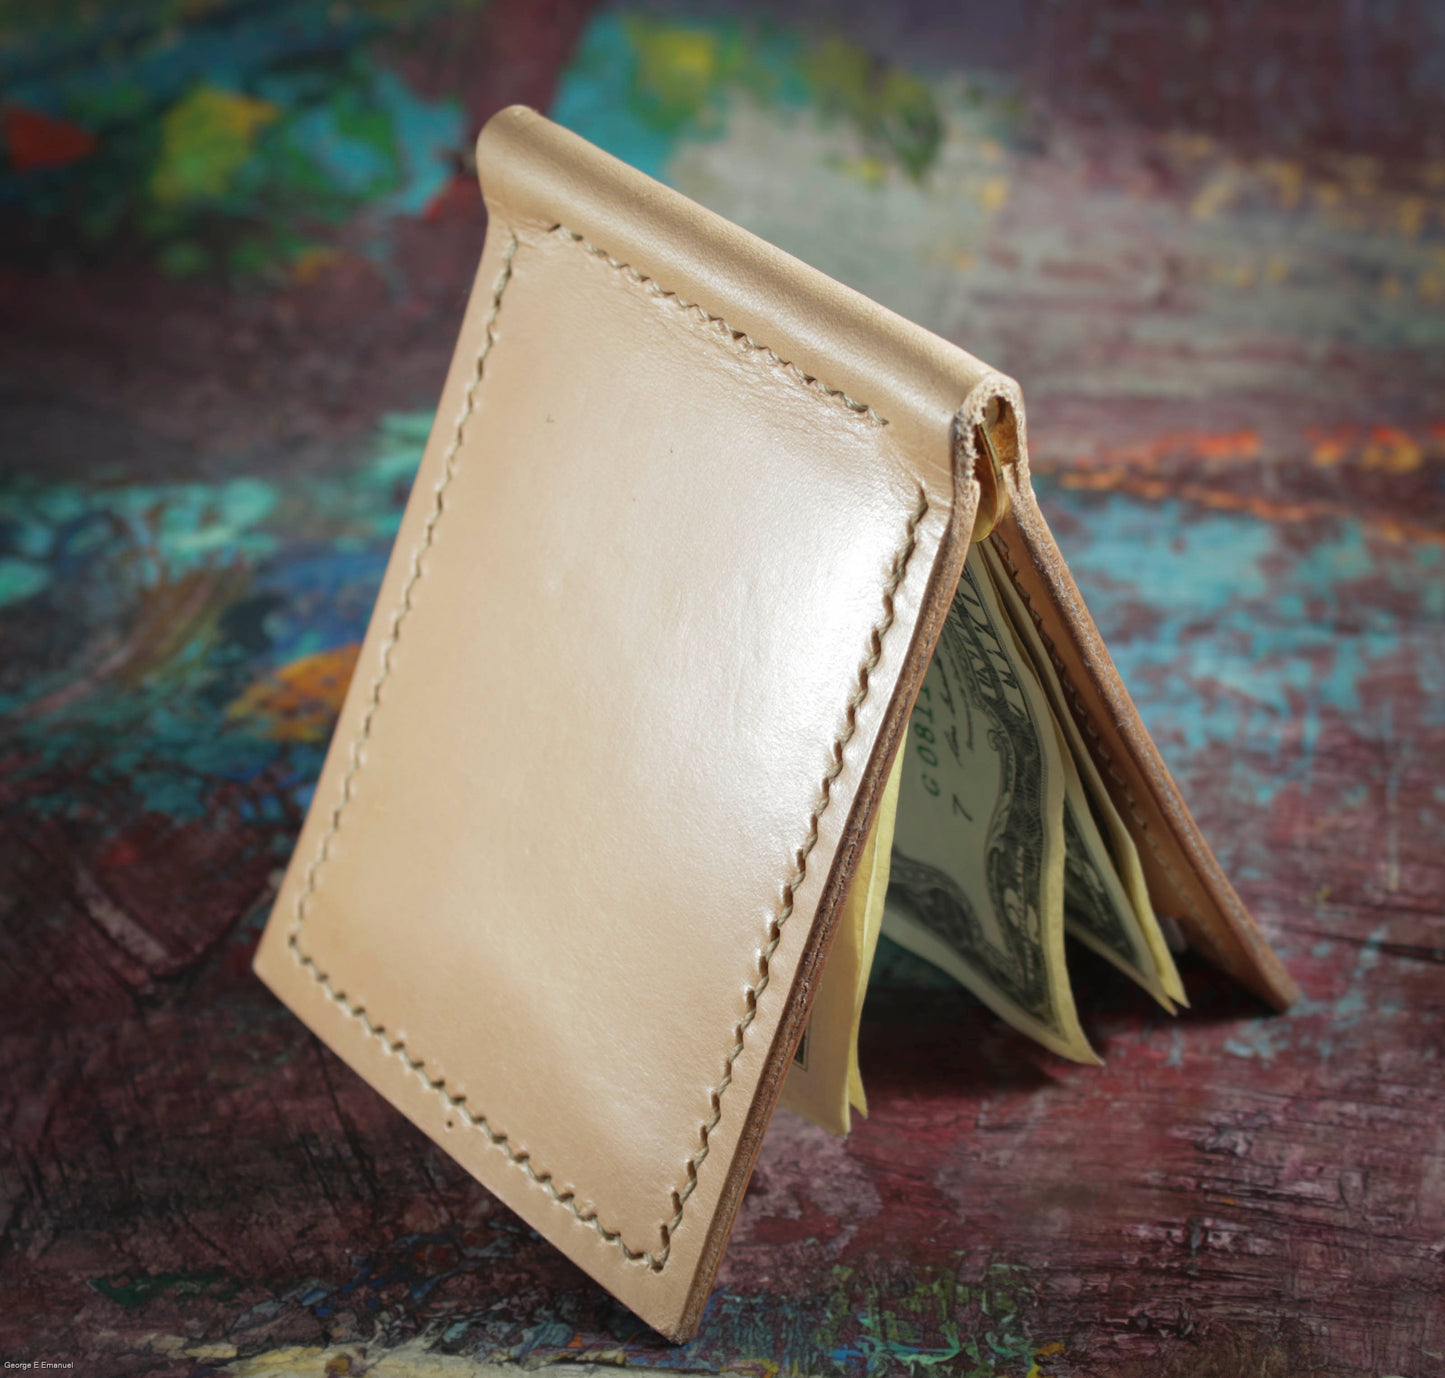 Introducing the Money Clipper and Card Carry Bi-fold Wallet